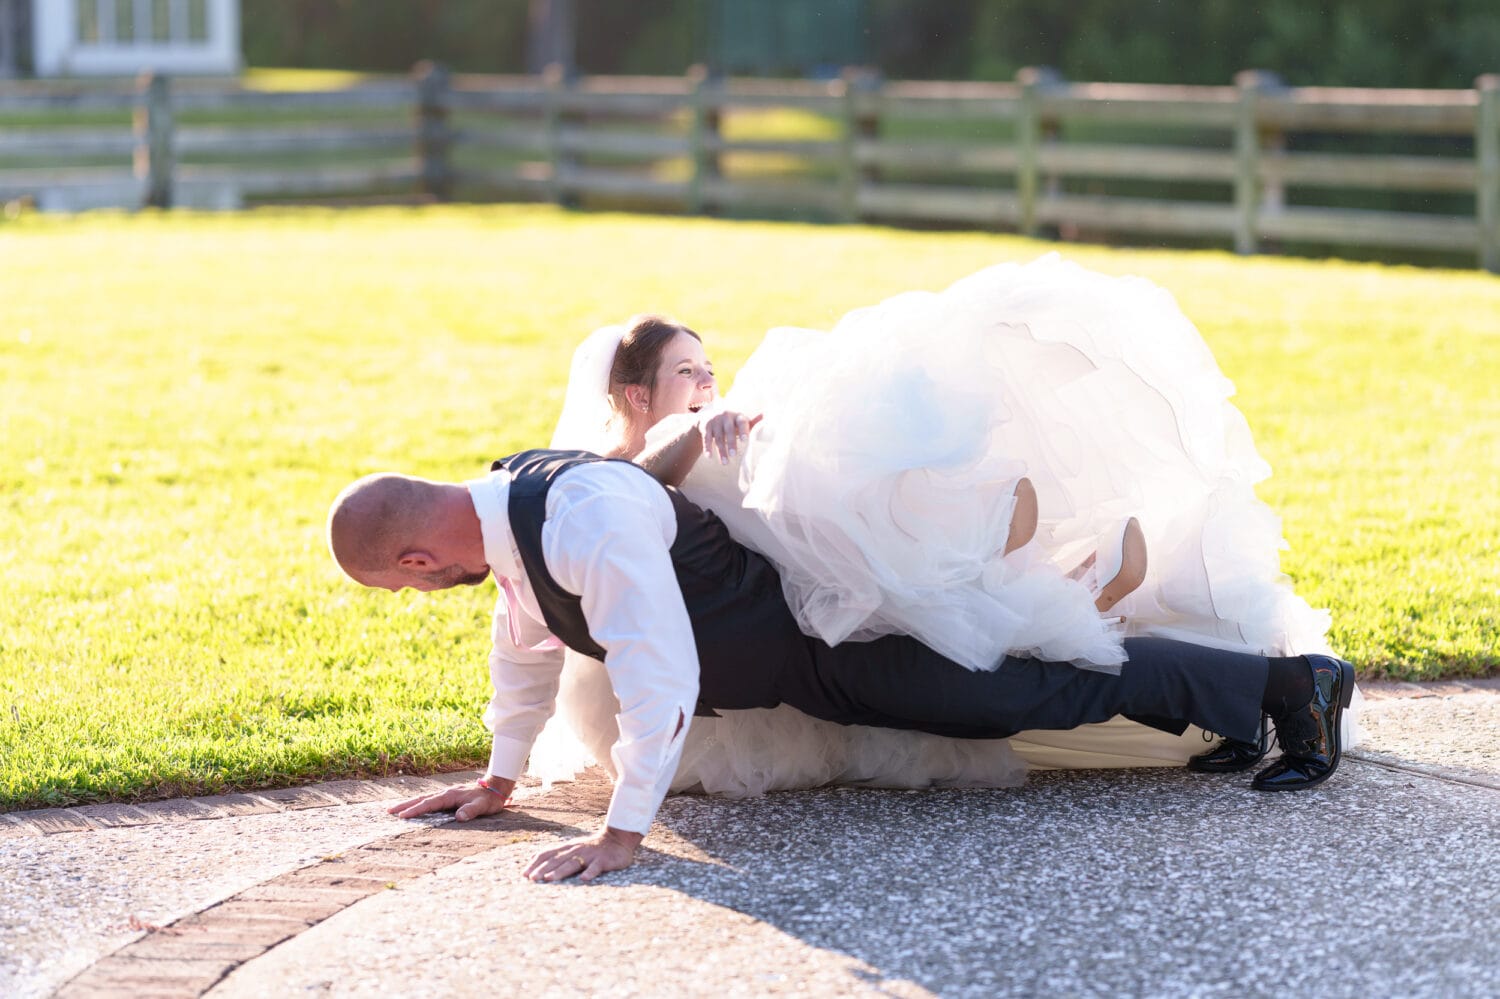 Groom doing pushups with bride on his back and falling - The Pavilion at Pepper Plantation